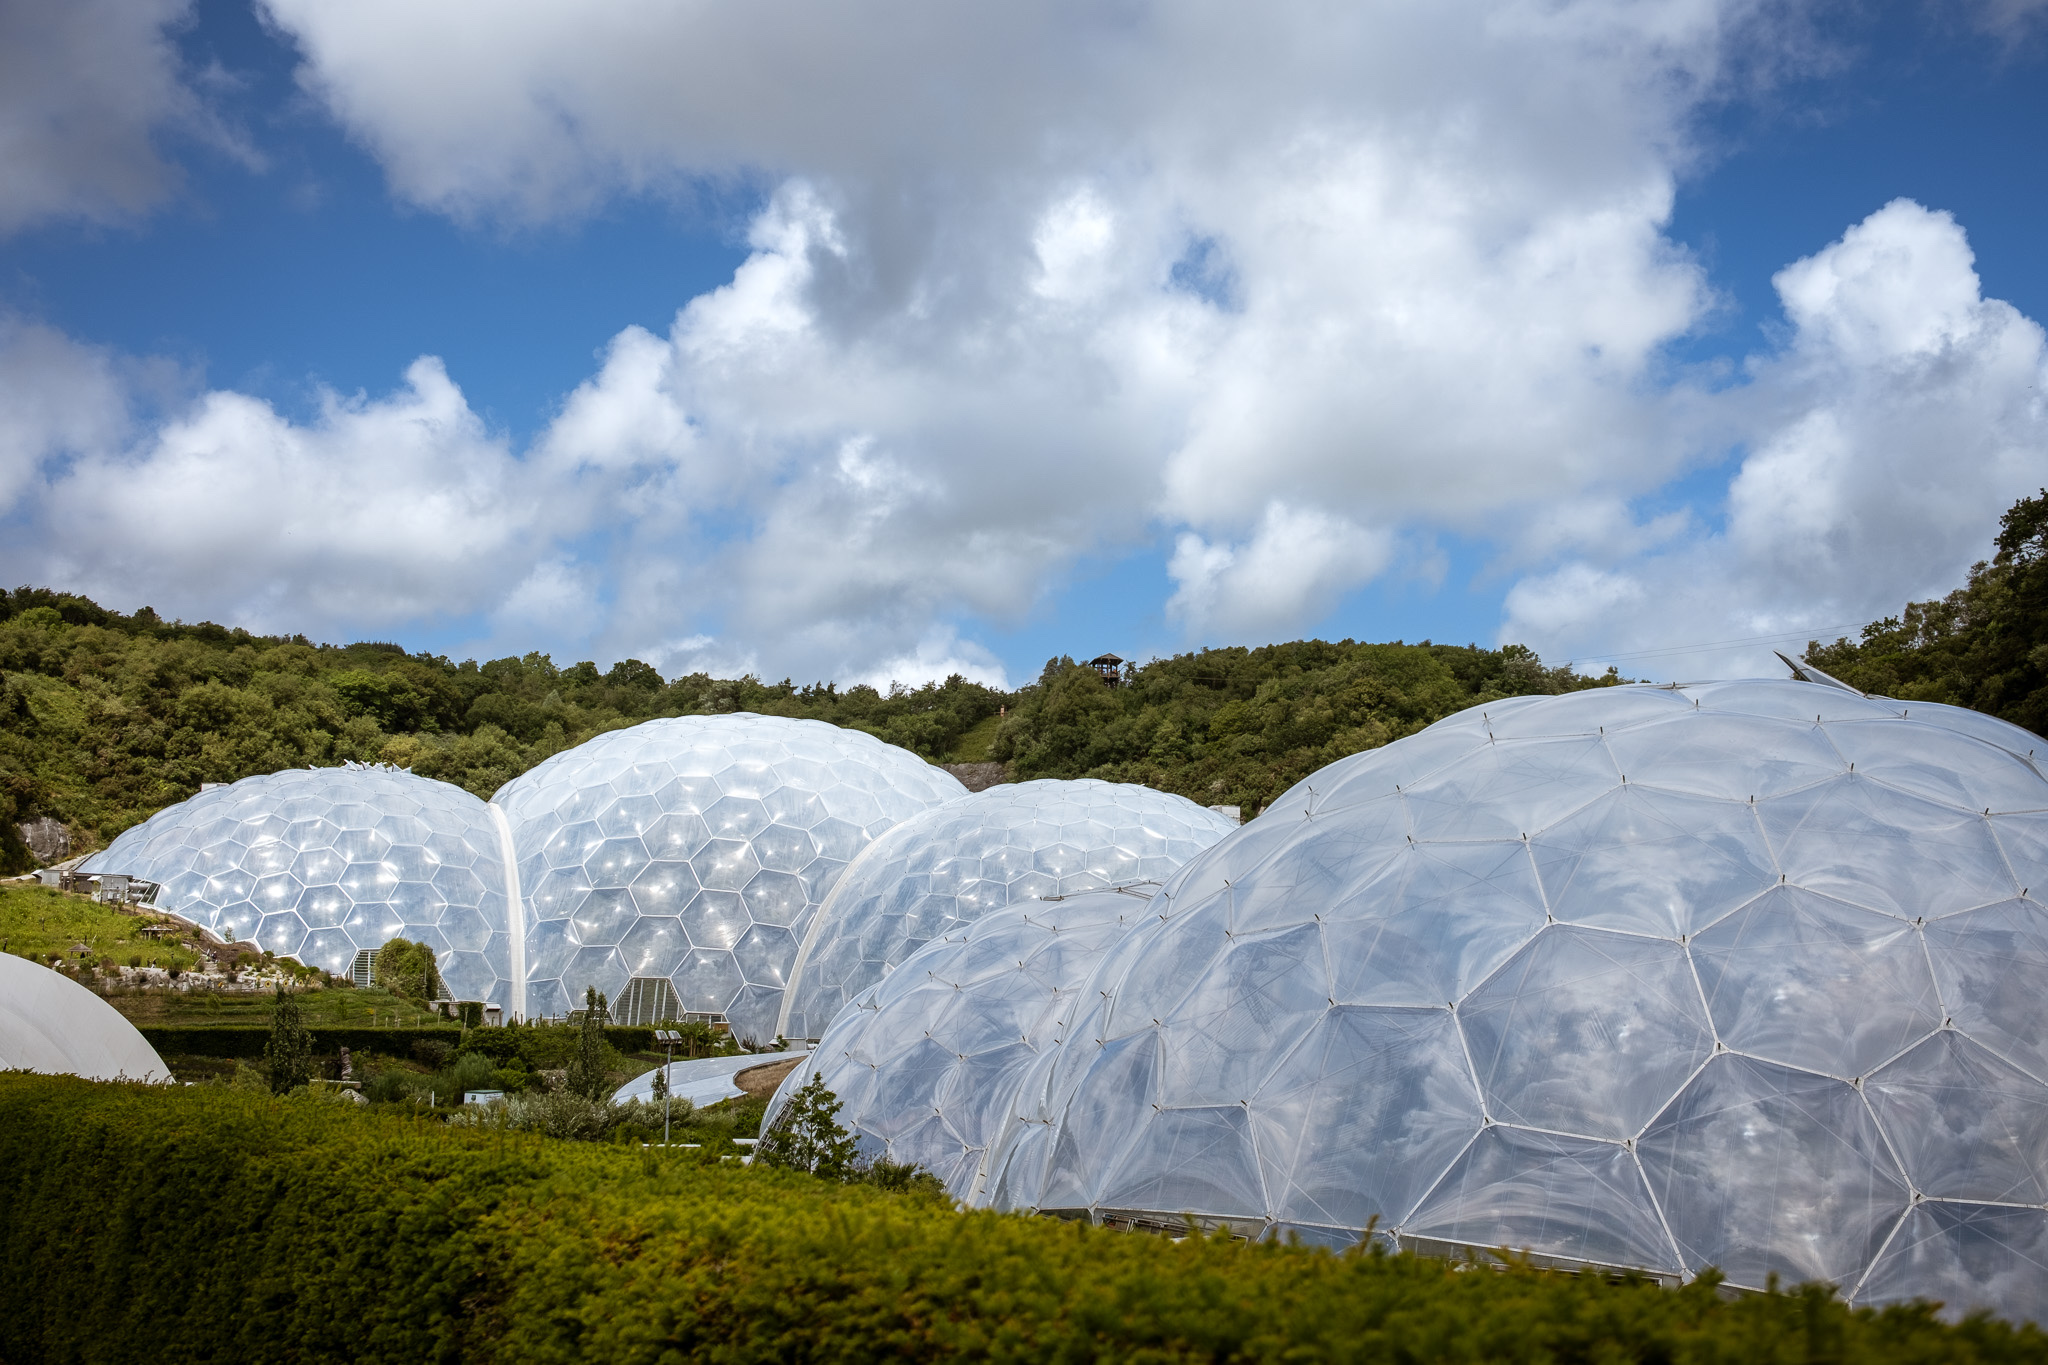 Great balloon baubles of the Eden Project stretch up into the clear blue sky